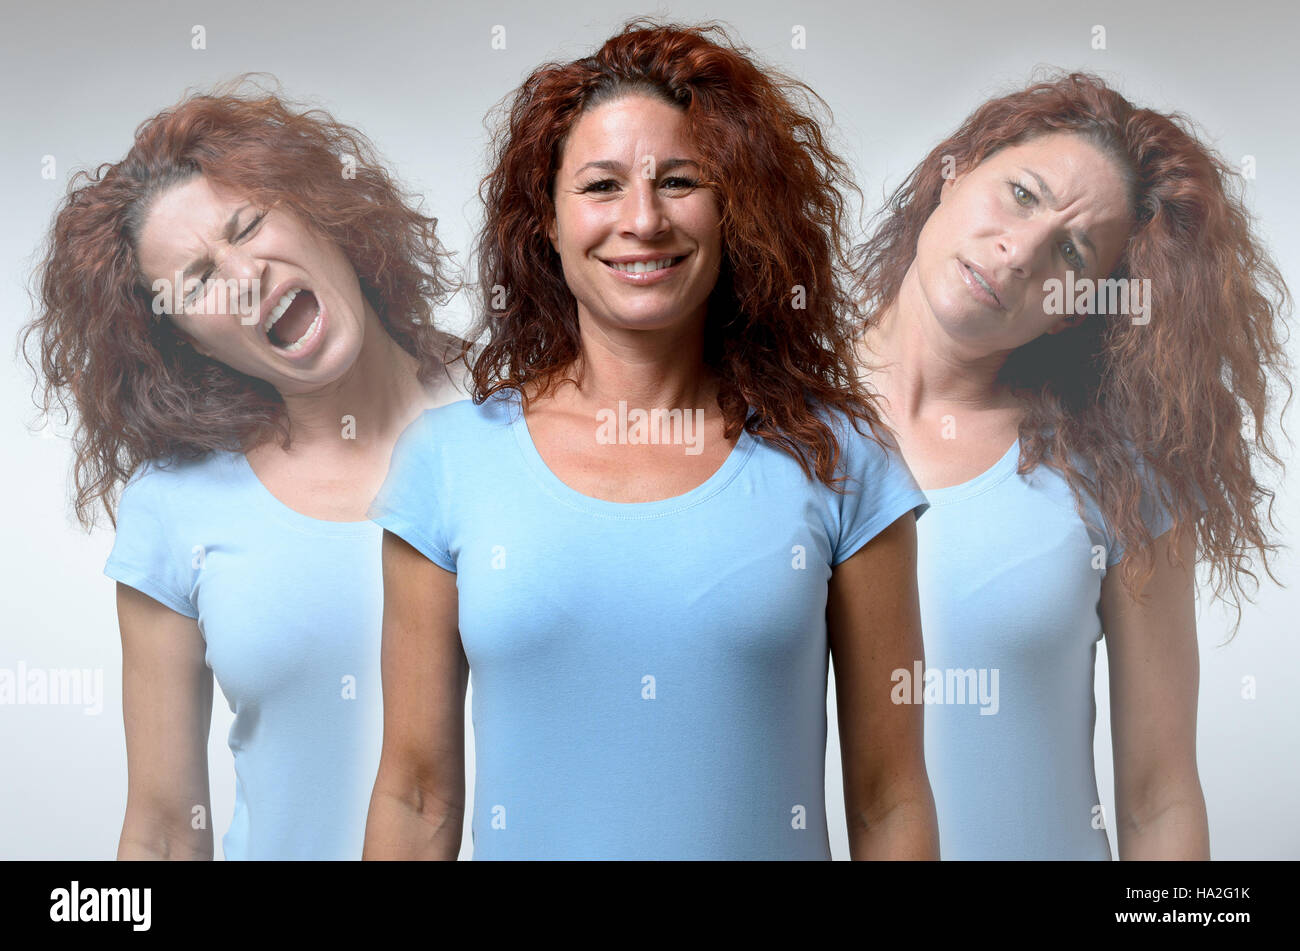 Front view on three versions of woman changing from moods of anger, joy and confusion Stock Photo